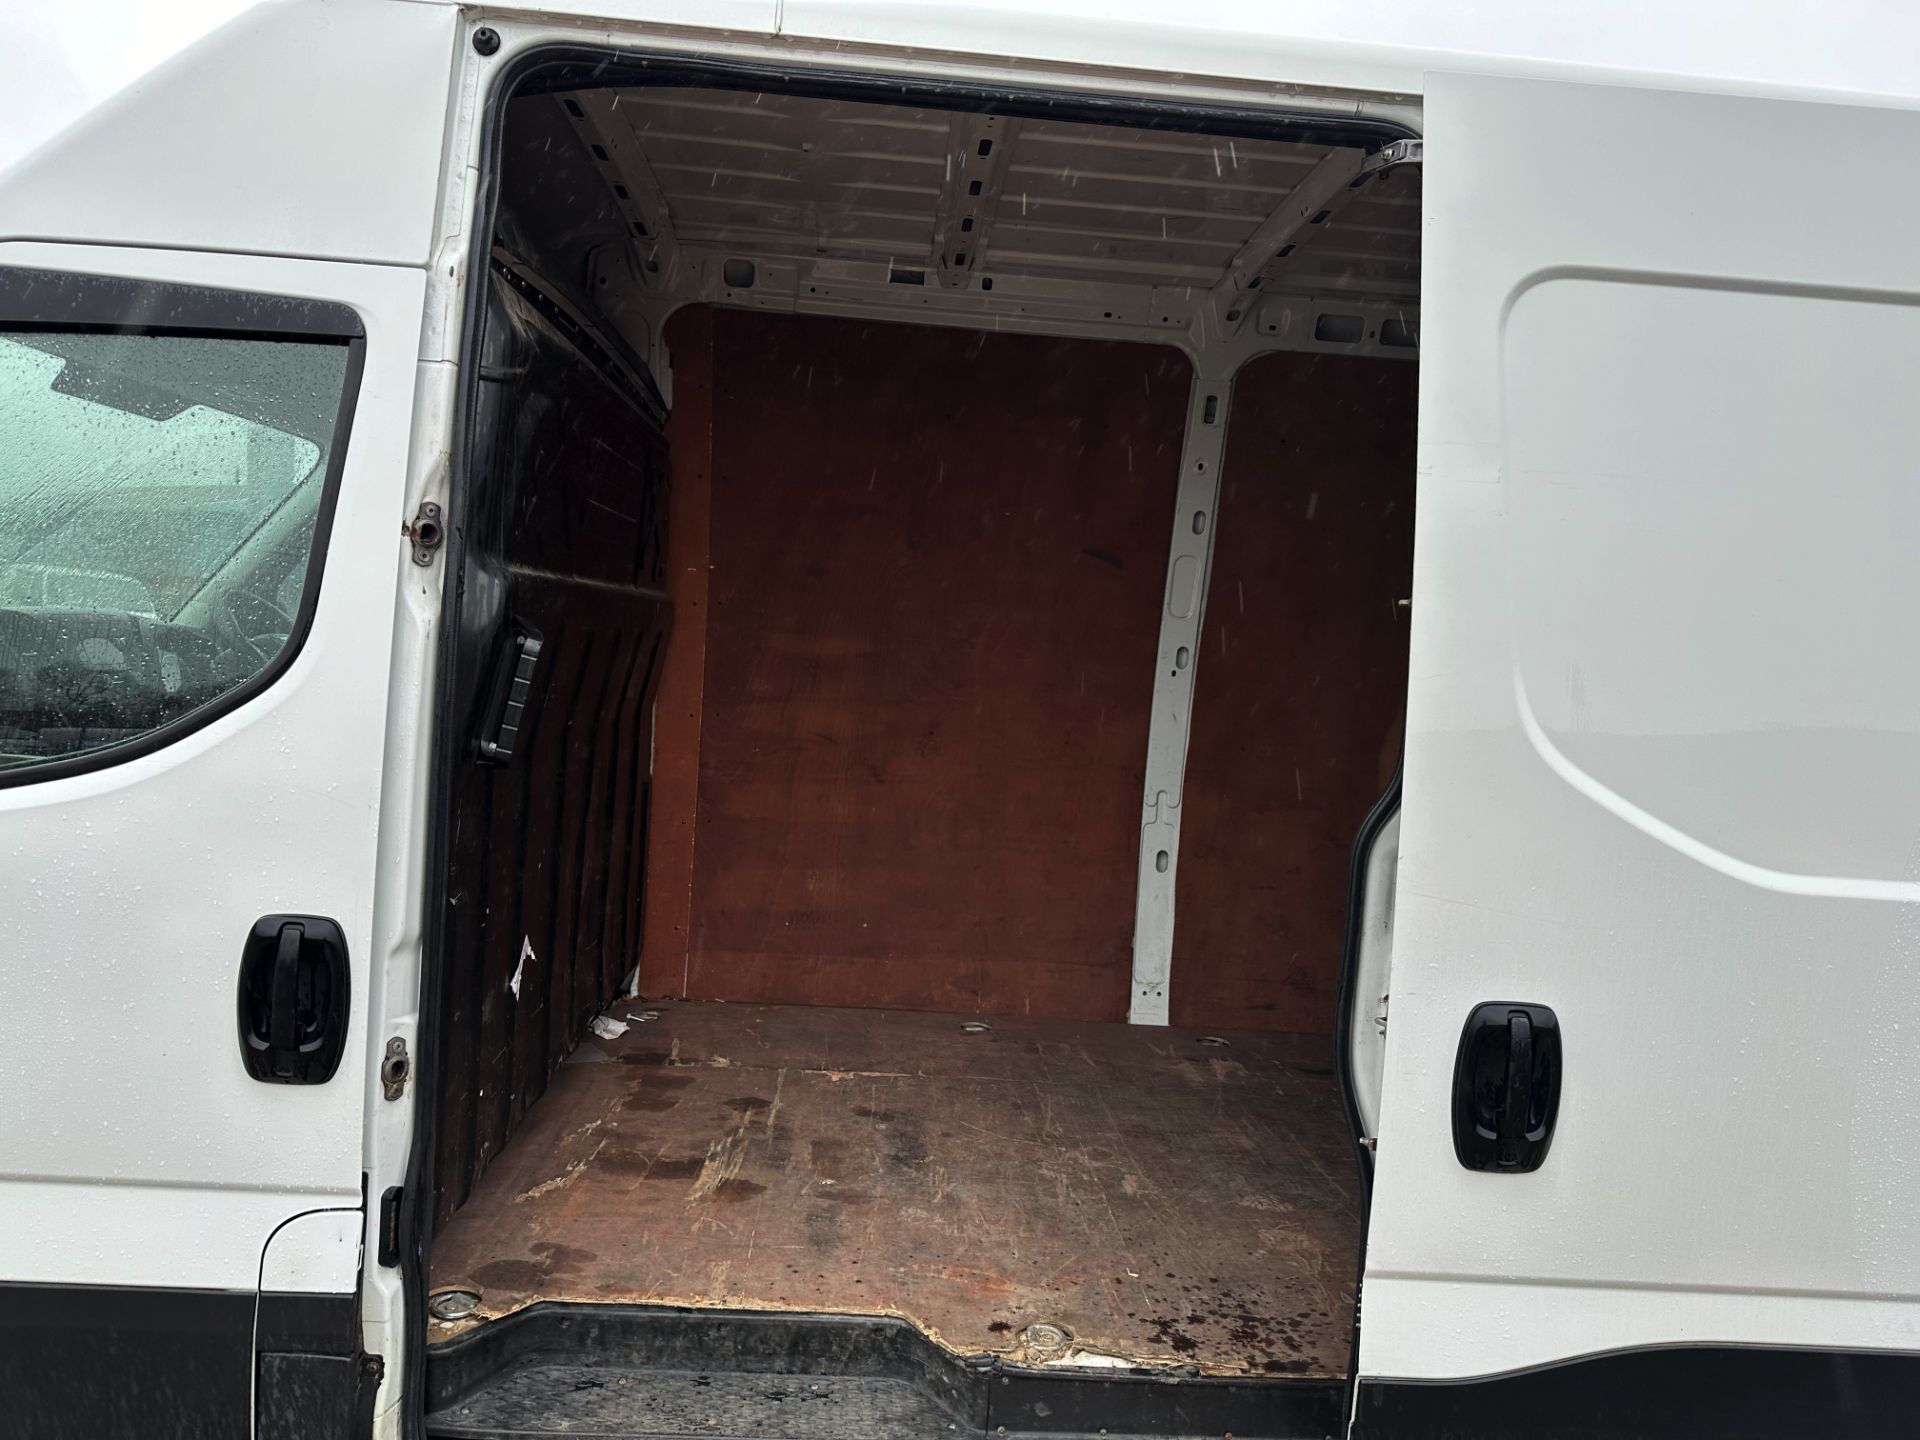 Iveco Daily 35-140 Long Wheel Base High Roof - 2021 Reg (New Shape) Only 85K Miles - Air Con - Look! - Image 12 of 27